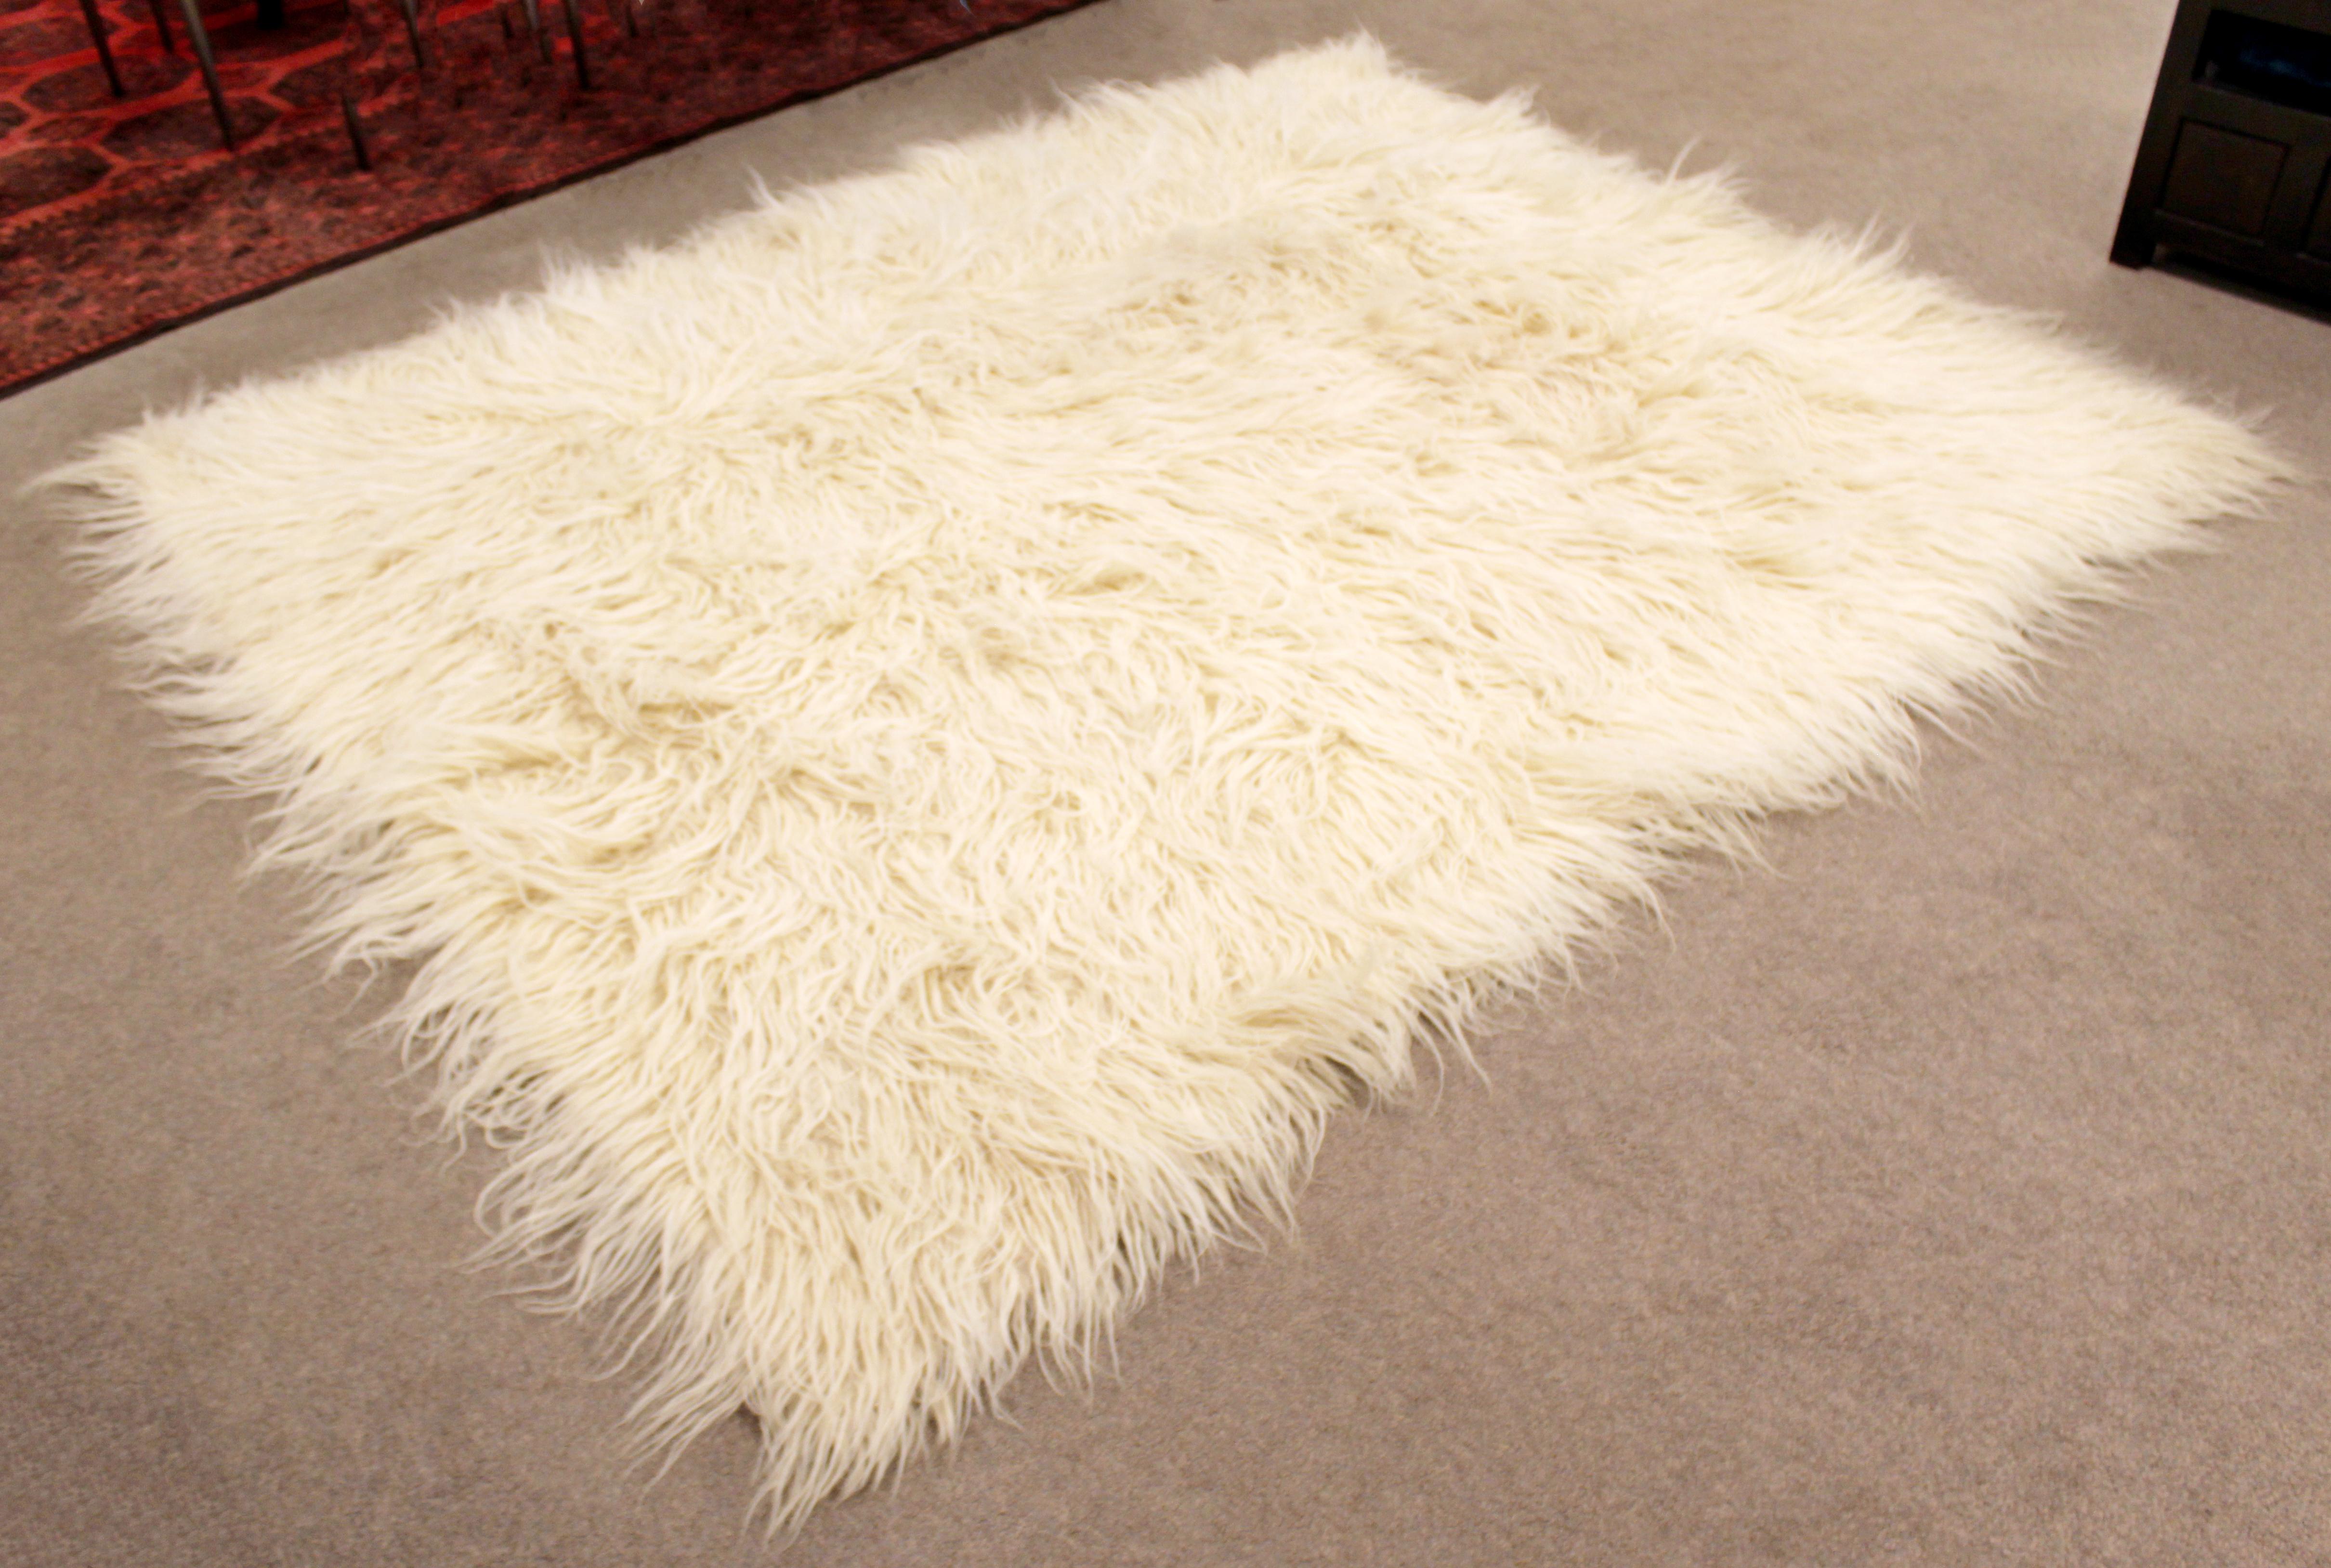 For your consideration is a ravishing and large, white flokati shag, handwoven wool area rug or carpet, circa 1970s. In excellent condition. The dimensions are 84